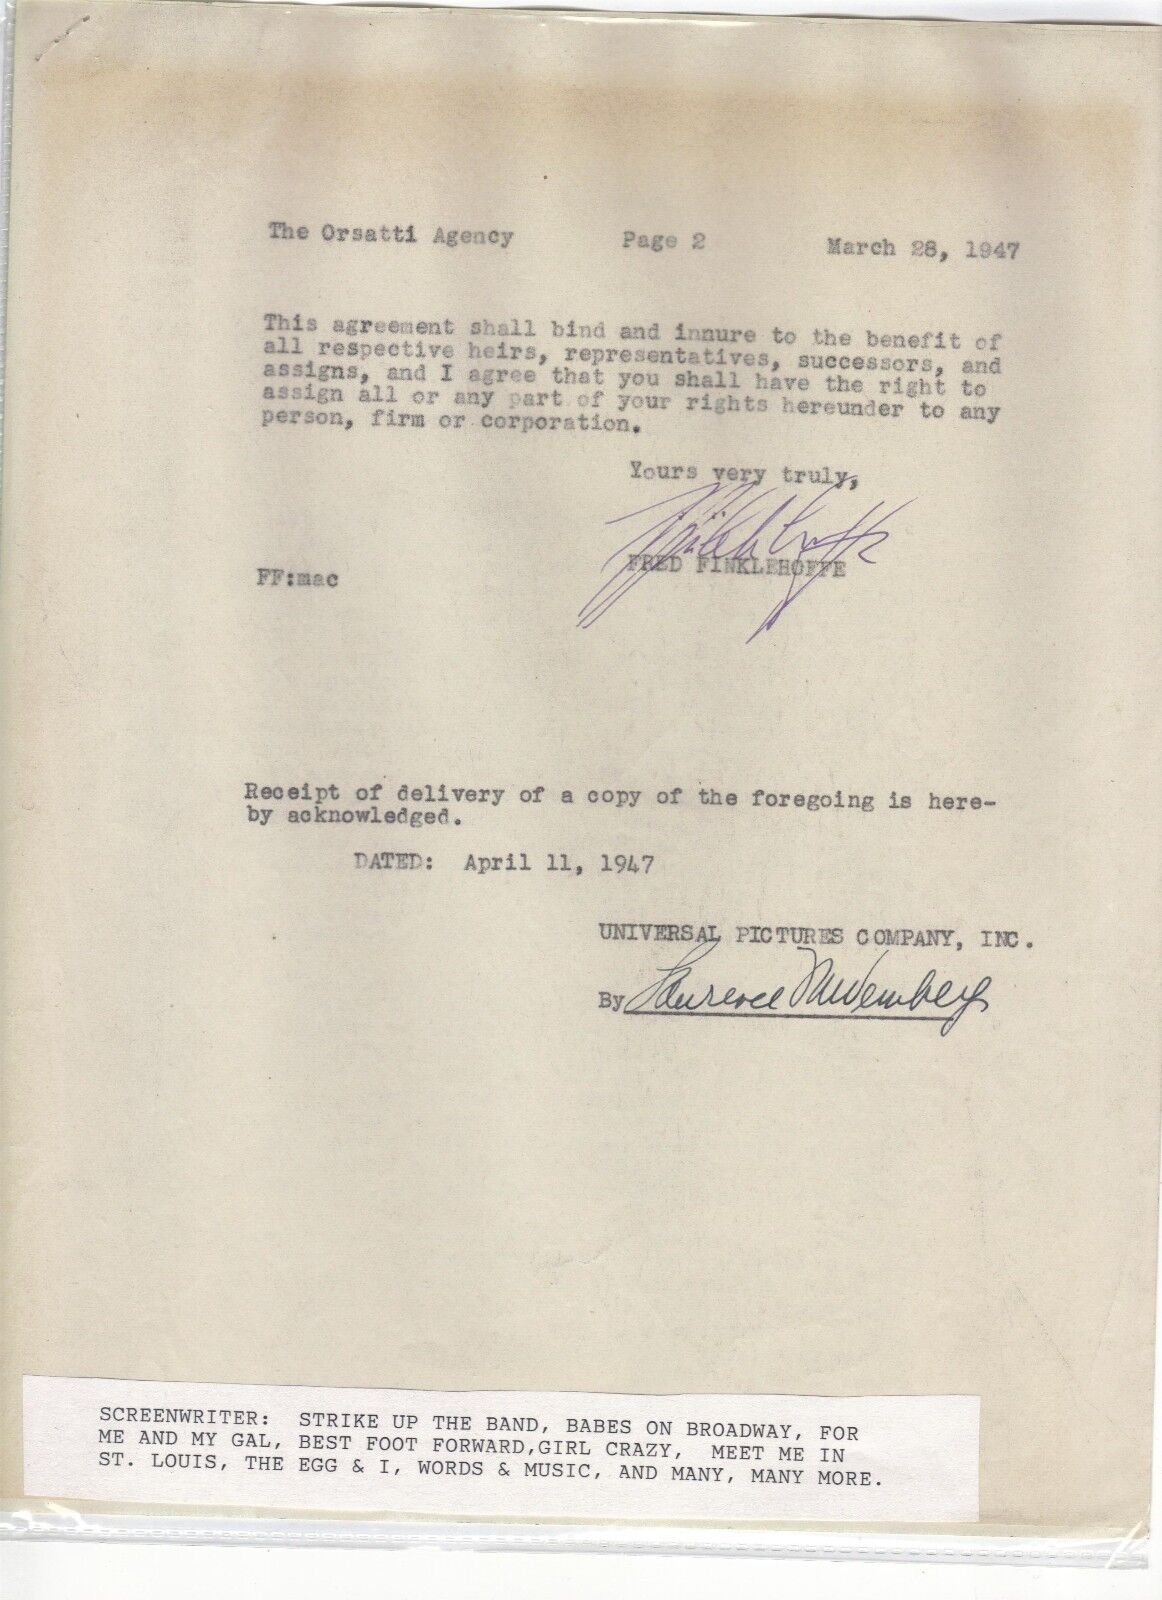 Fred Finklehoffe -" Meet Me In St. Louis" Screenwriter-2 Page Agreement-1947